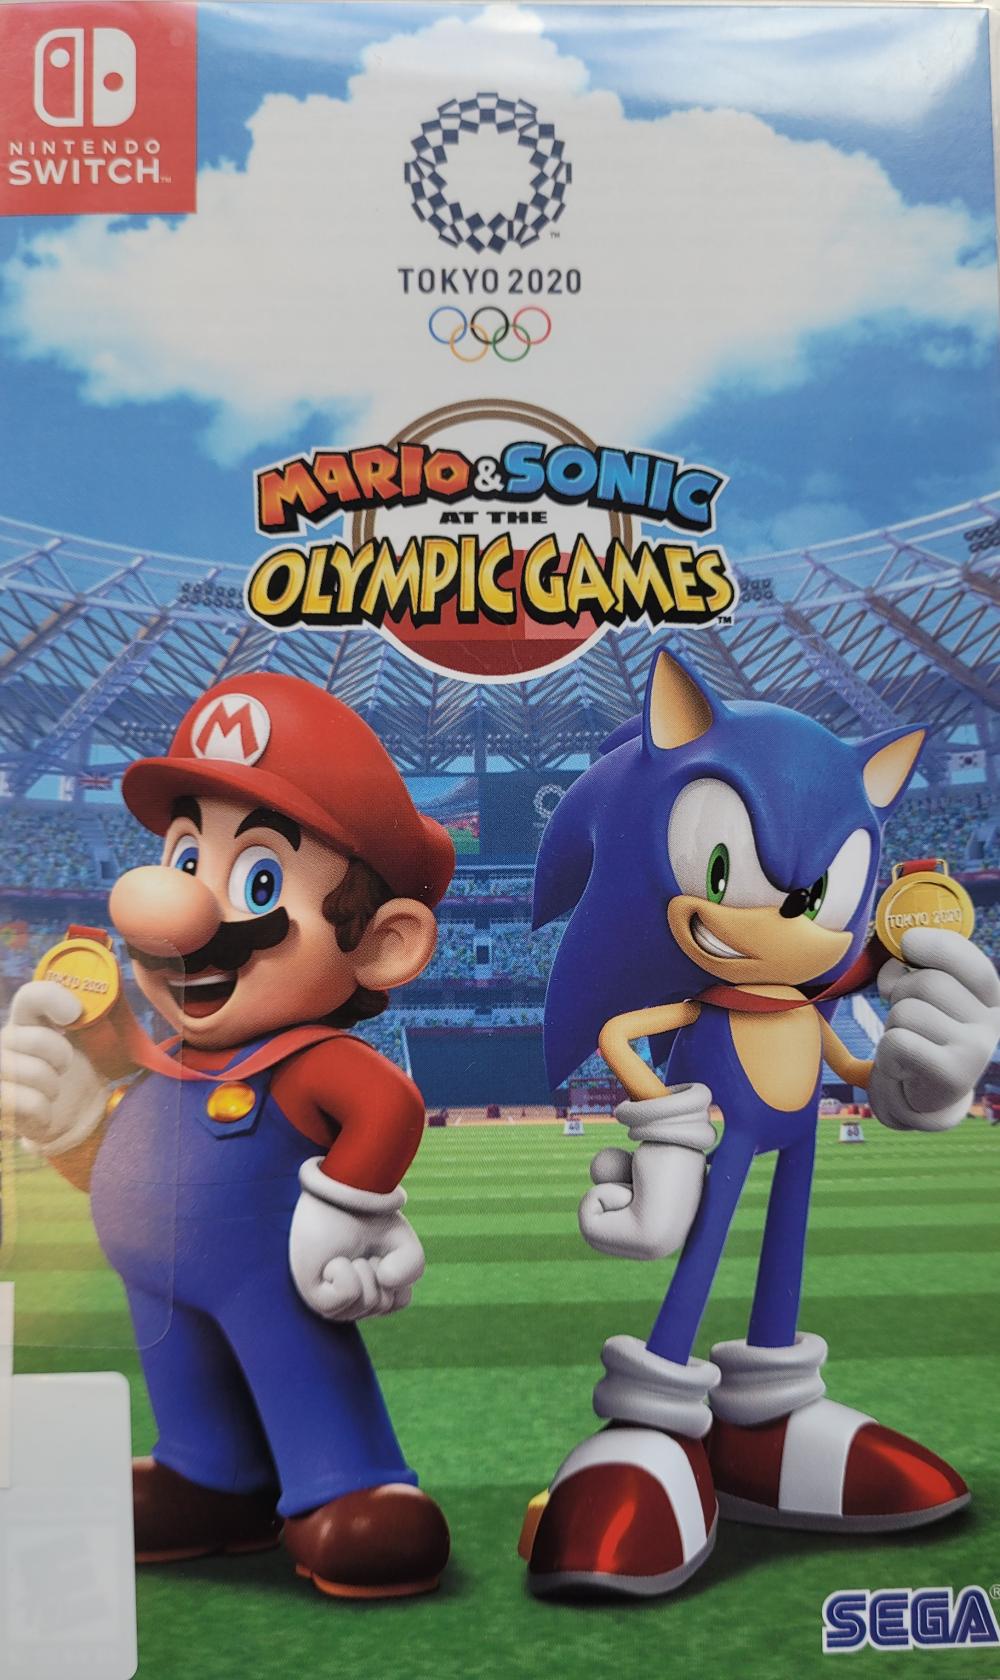 Mario & Sonic at the Olympic Games Game Cover